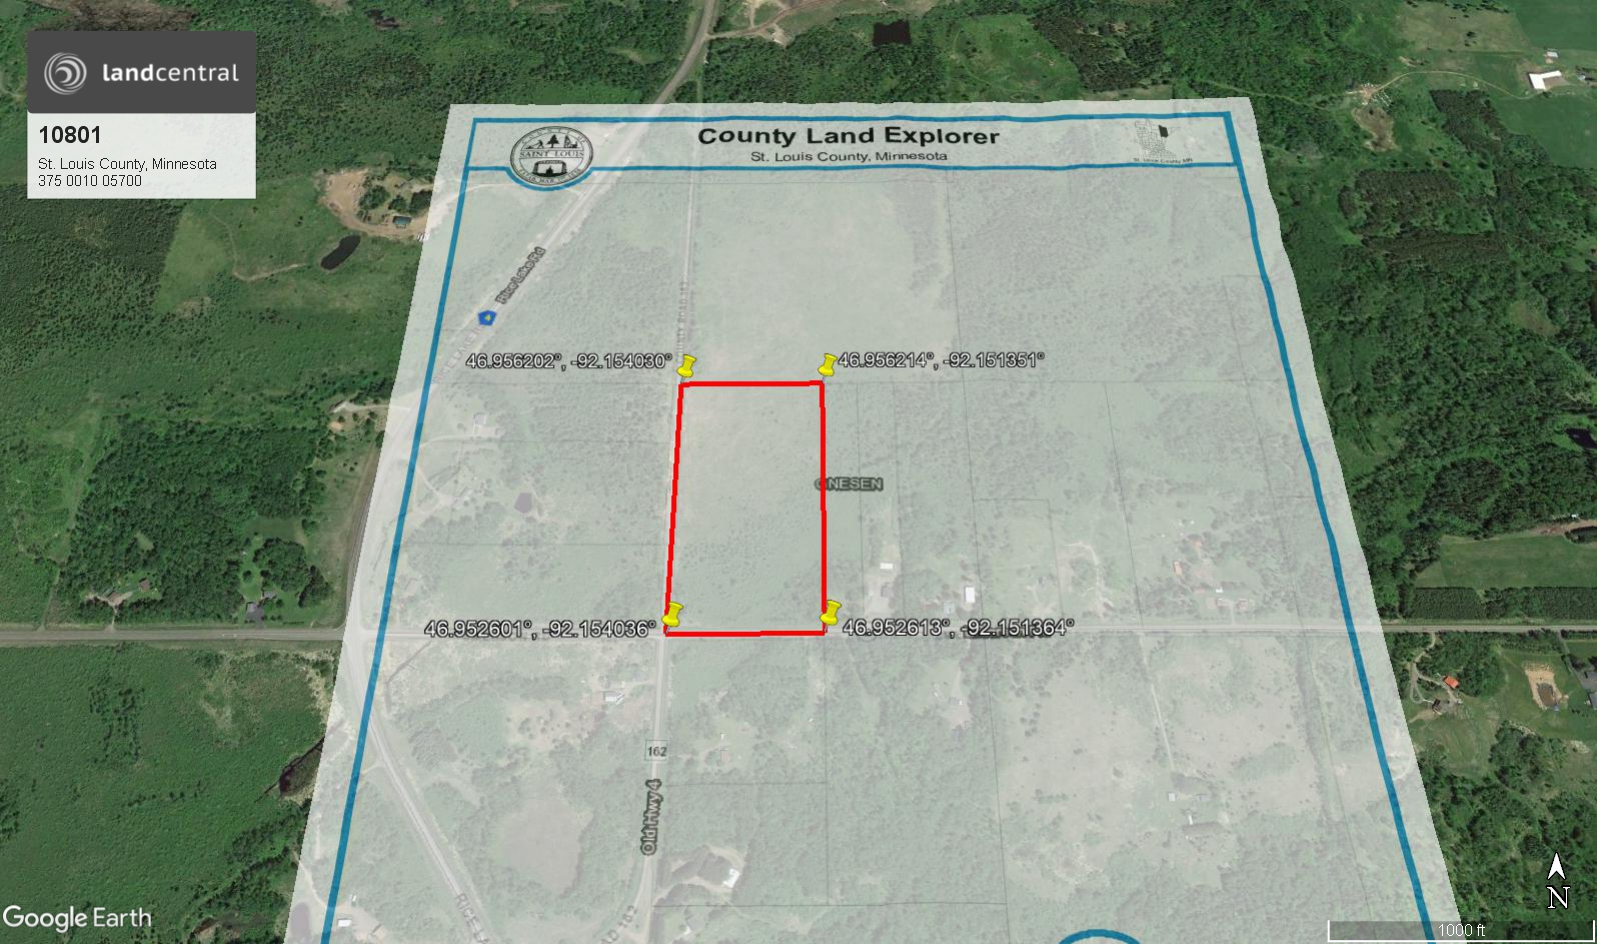 20 Acre Property North of Duluth | LandCentral